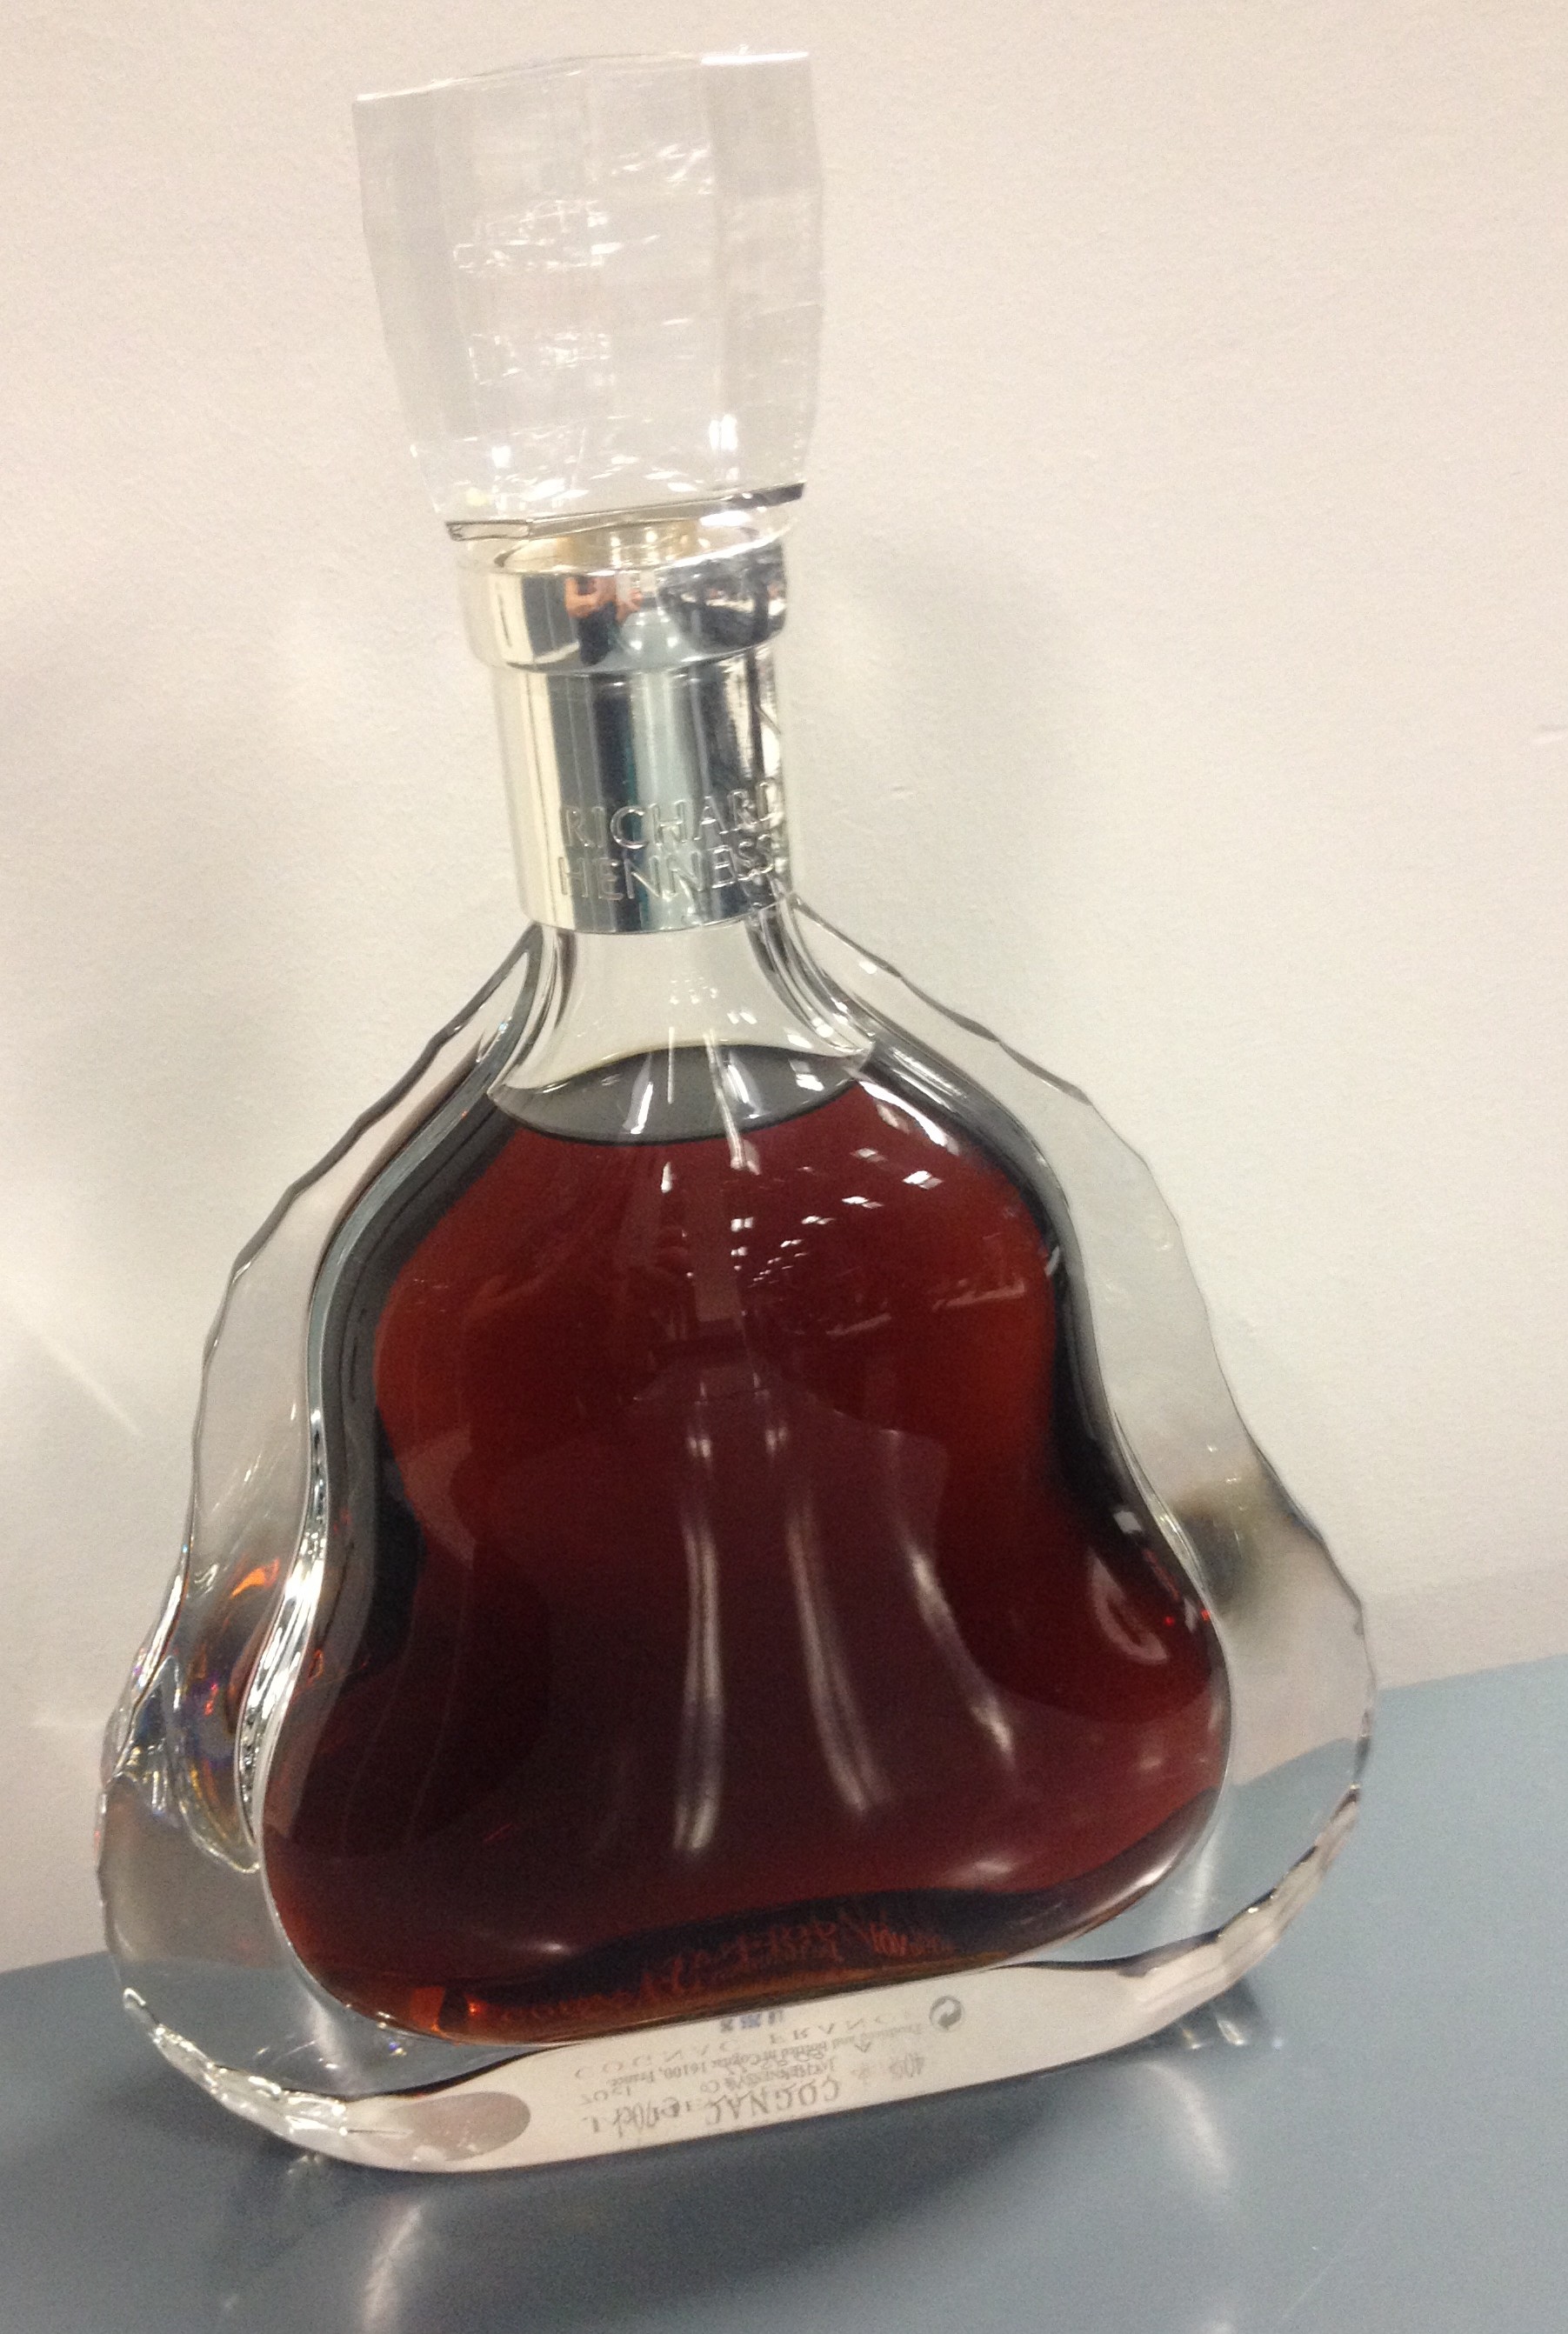 Richard Hennessy Cognac For Sale Cognac Expert The Cognac Blog About Brands And Reviews Of